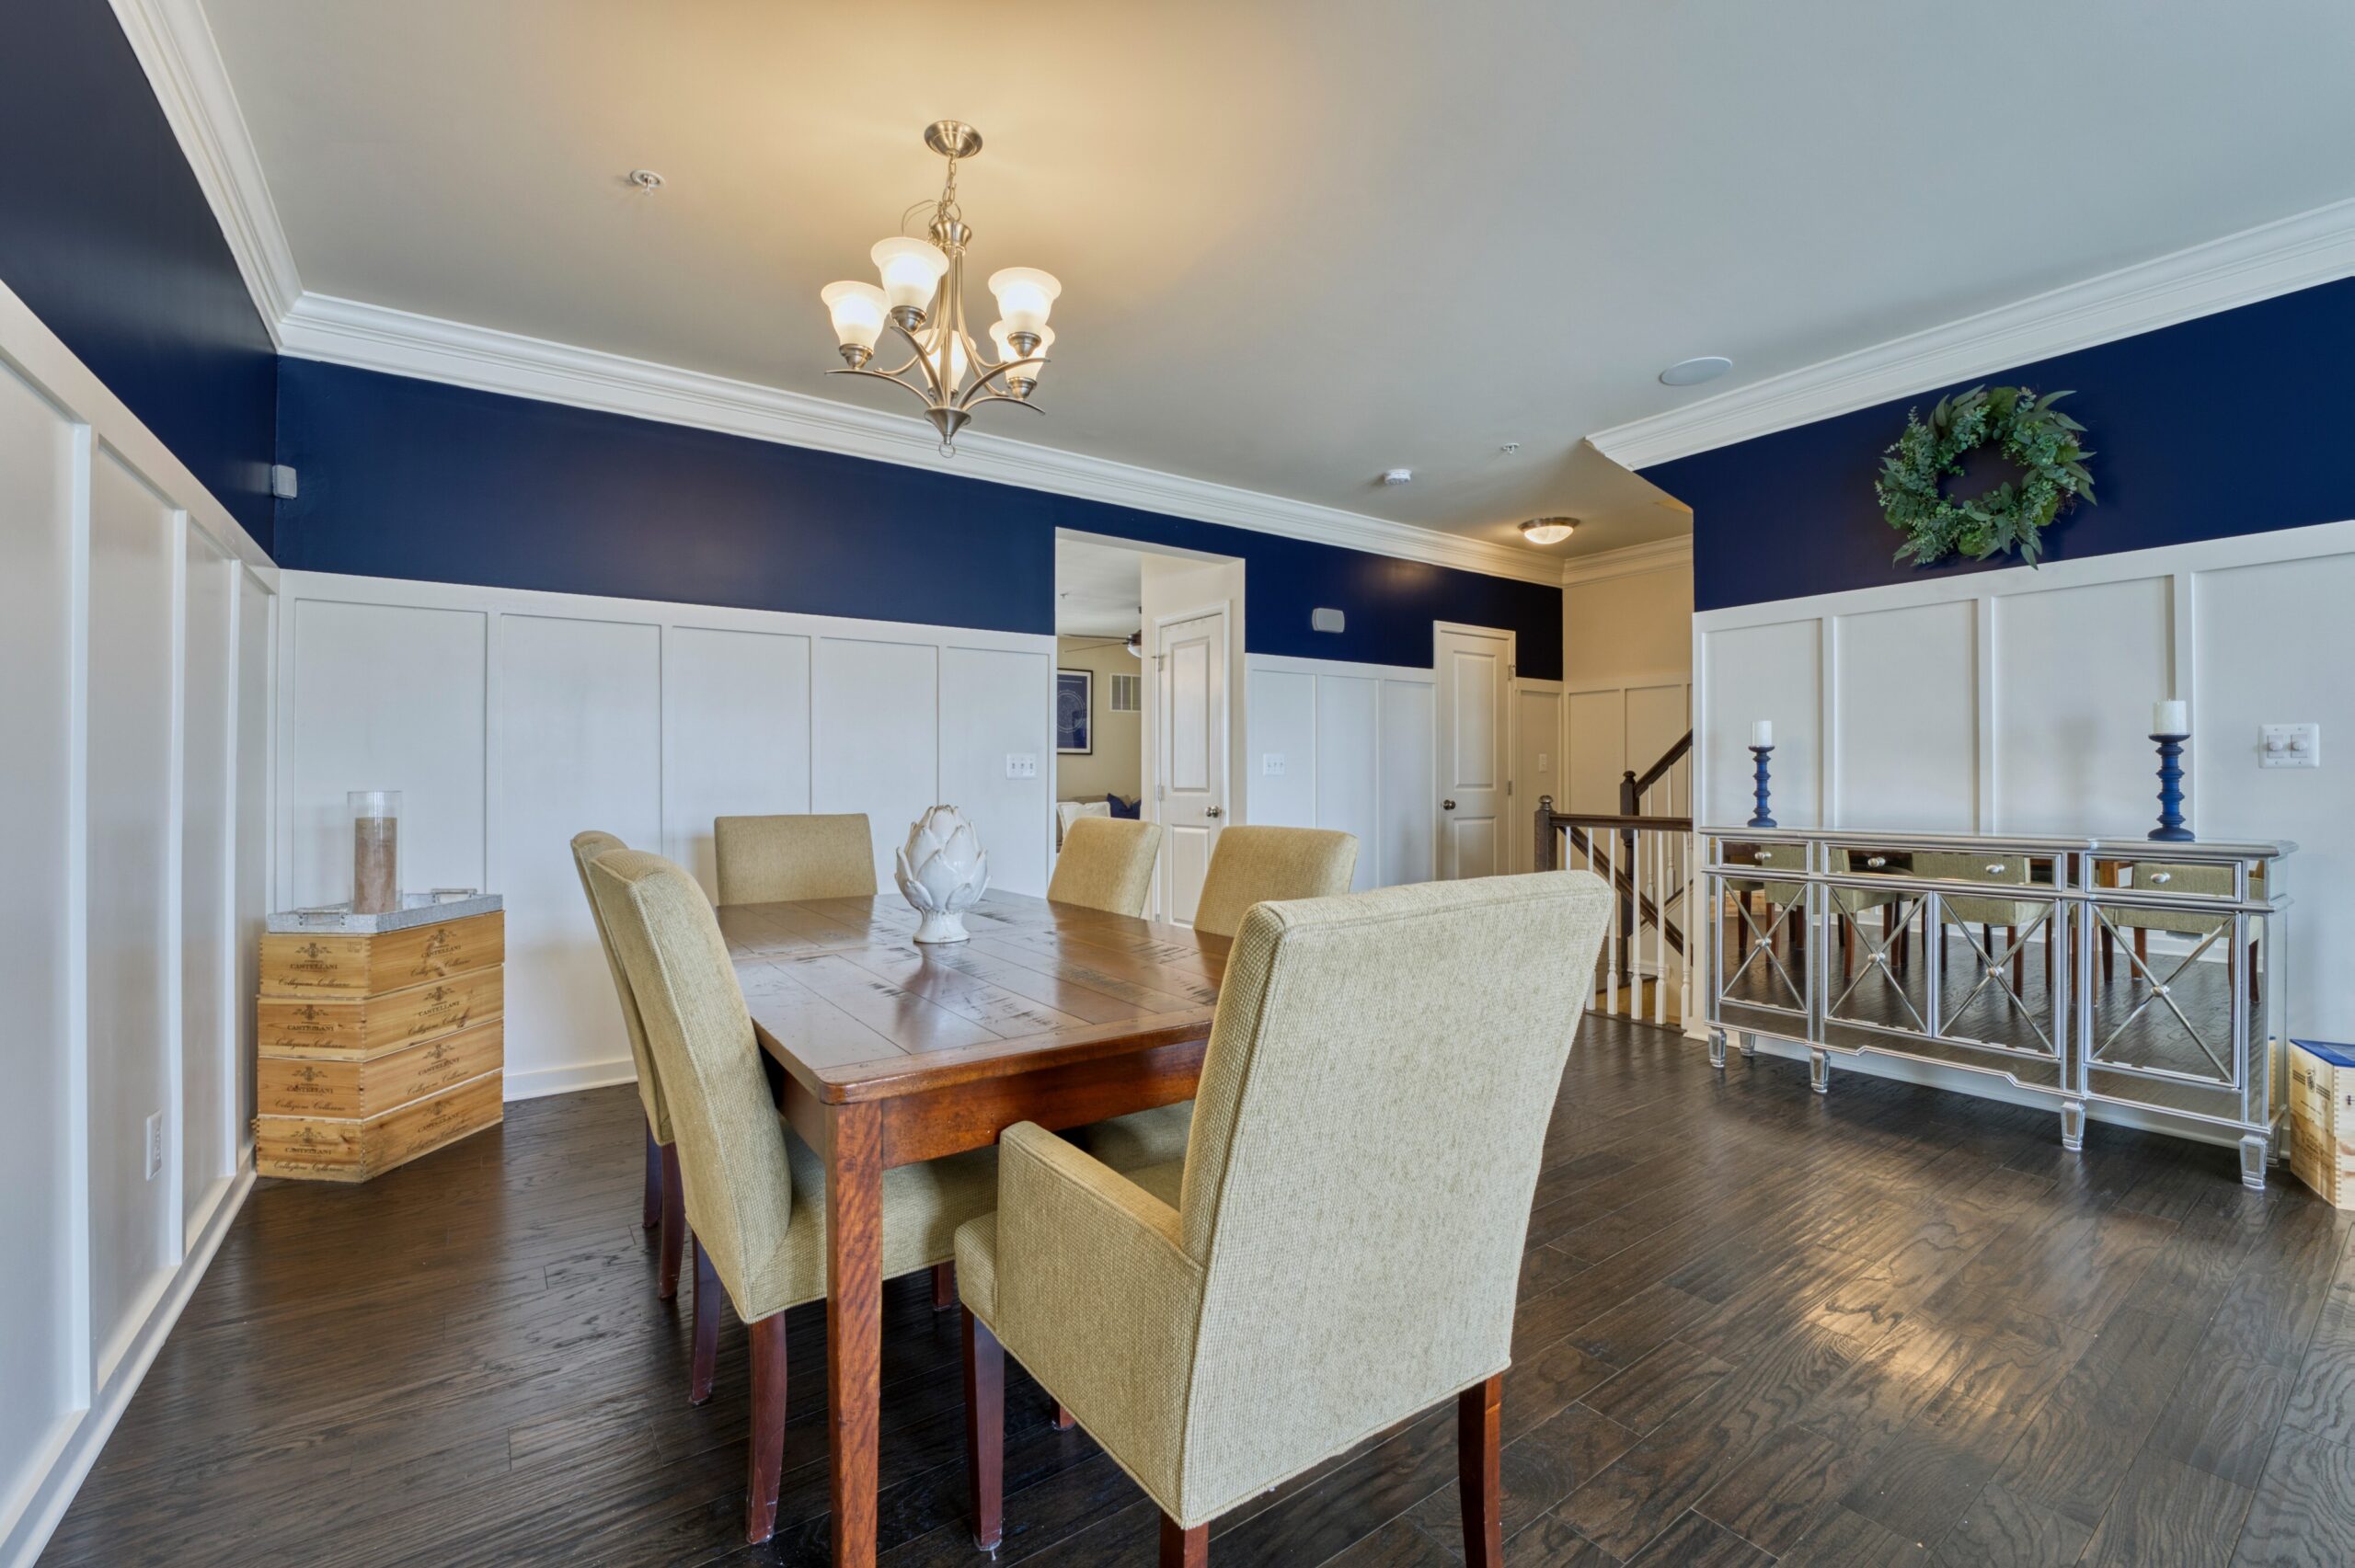 Professional interior photo of 23560 Buckland Farm Ter, Ashburn, VA - Showing the dining area with white wainscoting against white walls bordered by deep blue around the top third of the wall over the wainscoting